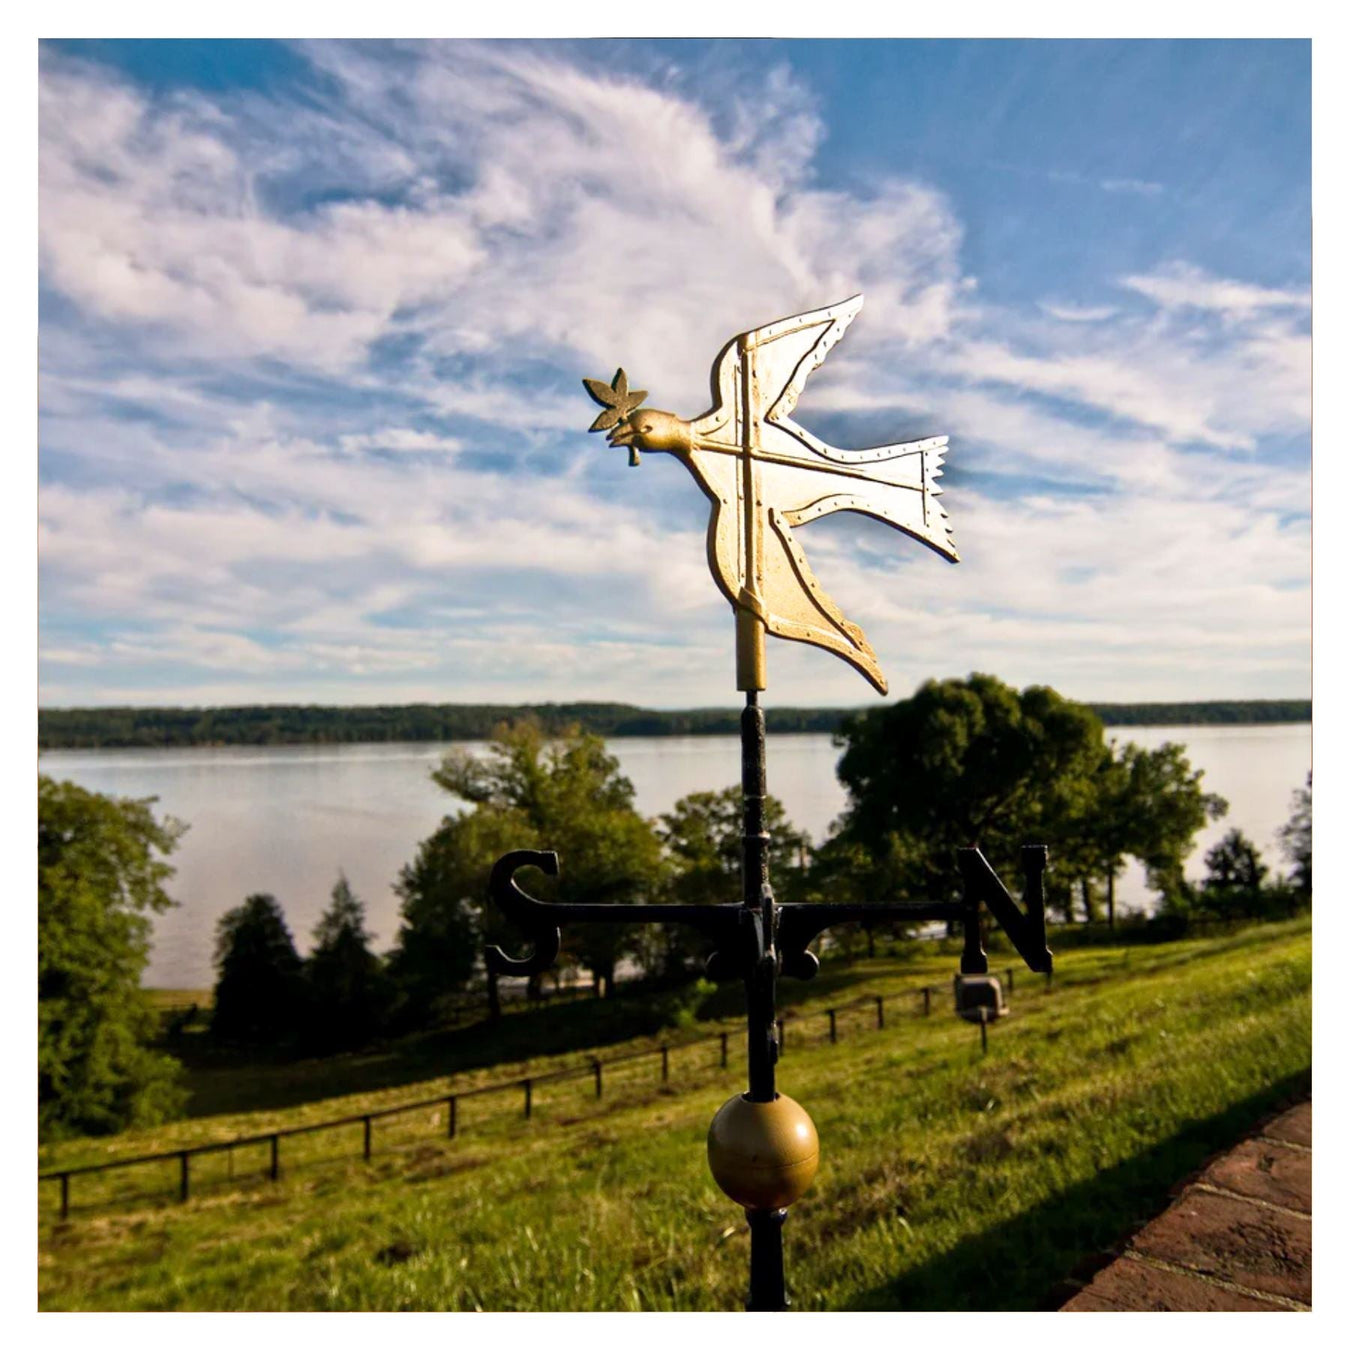 Dove of Peace Weathervane - WHITEHALL - The Shops at Mount Vernon